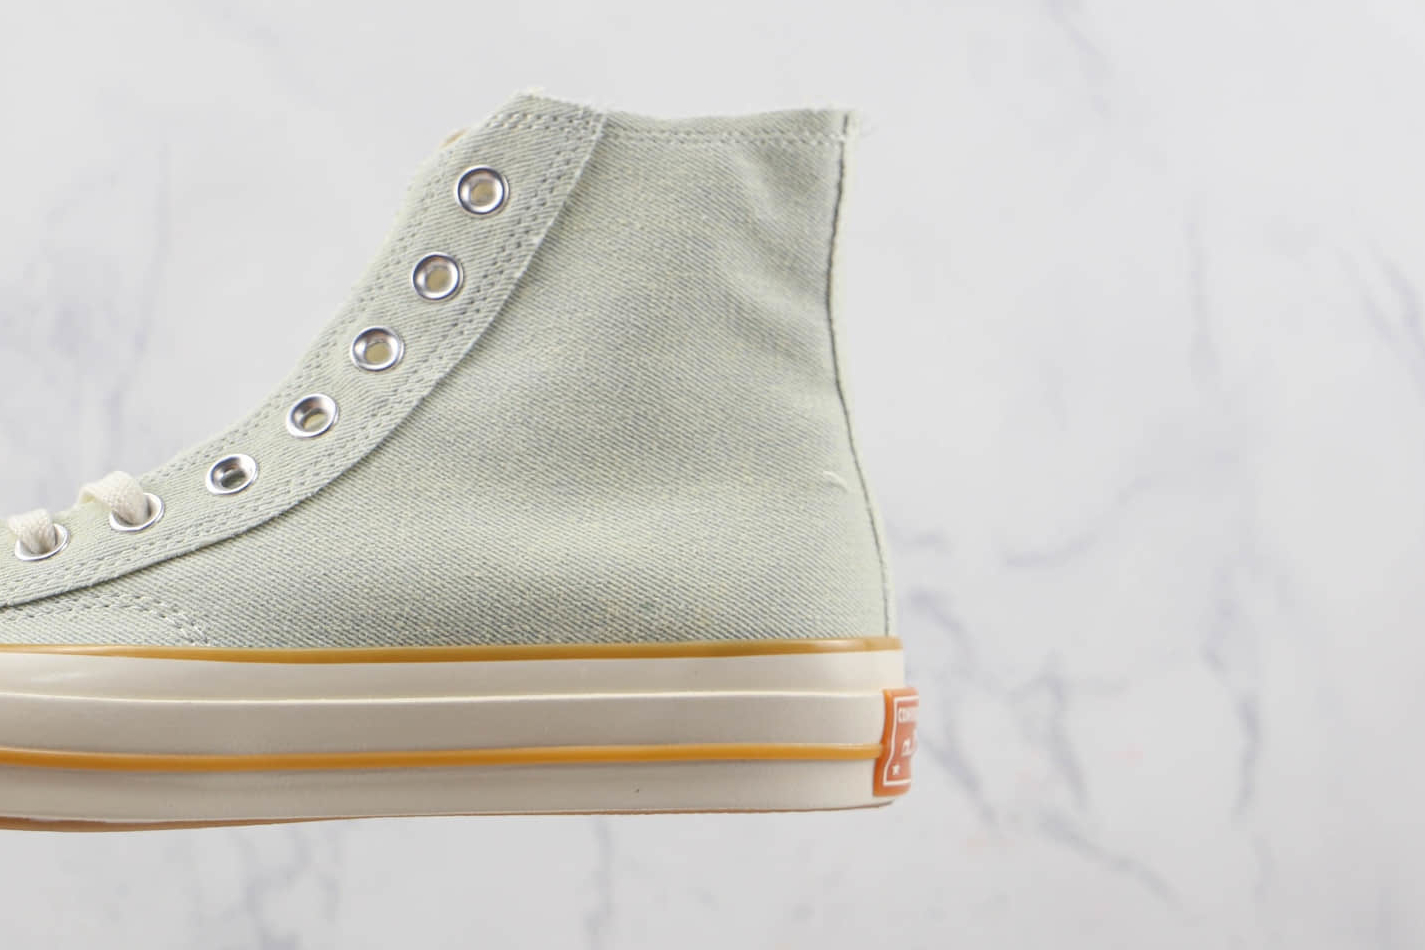 Converse Chuck Taylor All Star 1970s A02287C: Classic Sneakers with Vintage Appeal